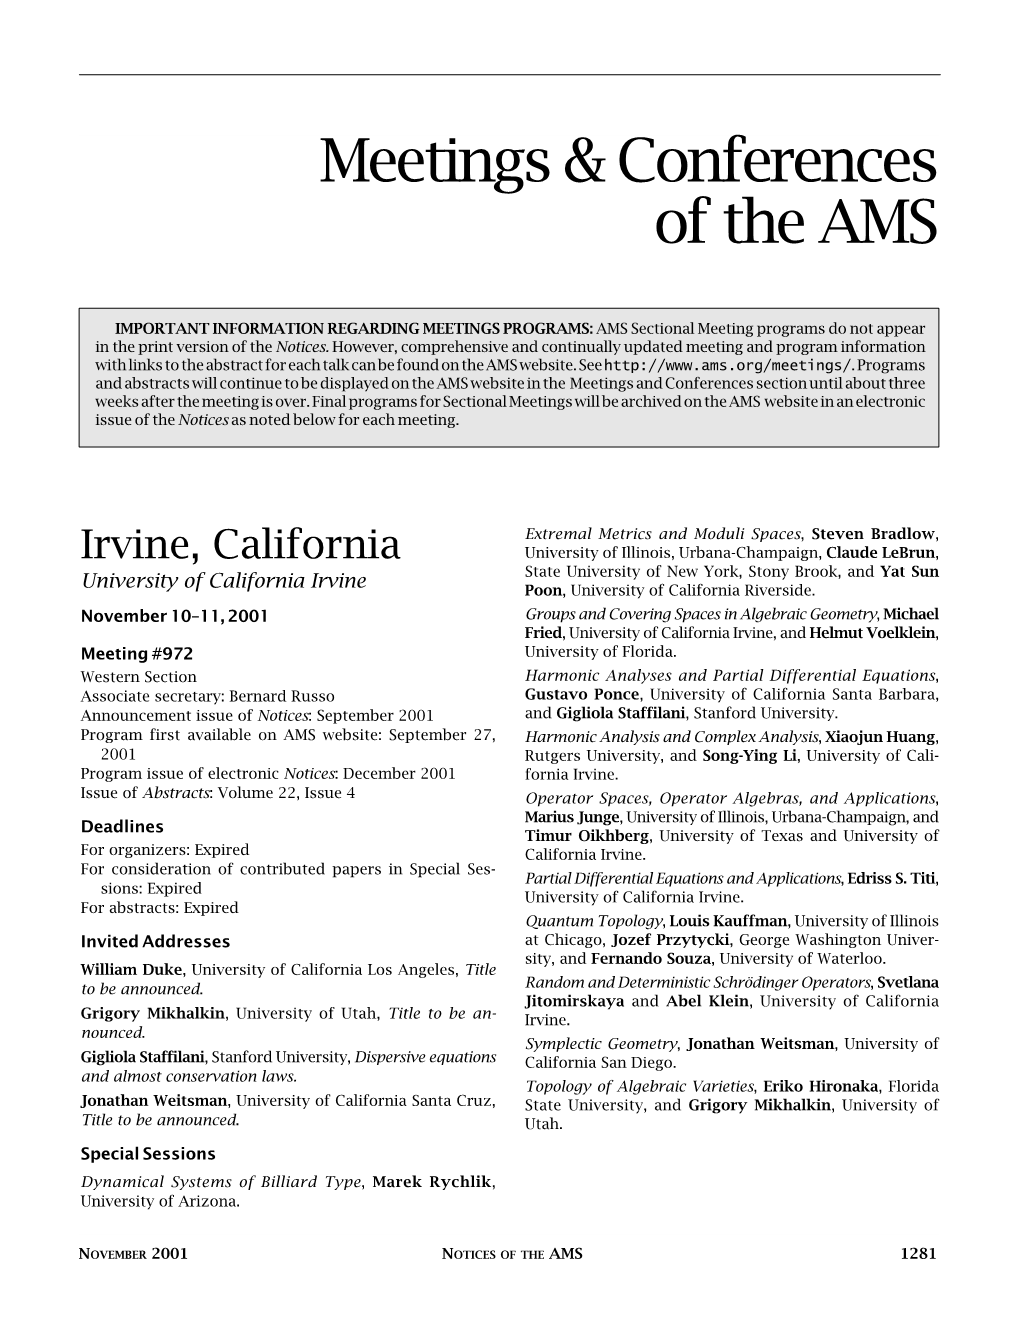 Meetings & Conferences of the AMS, Volume 48, Number 10